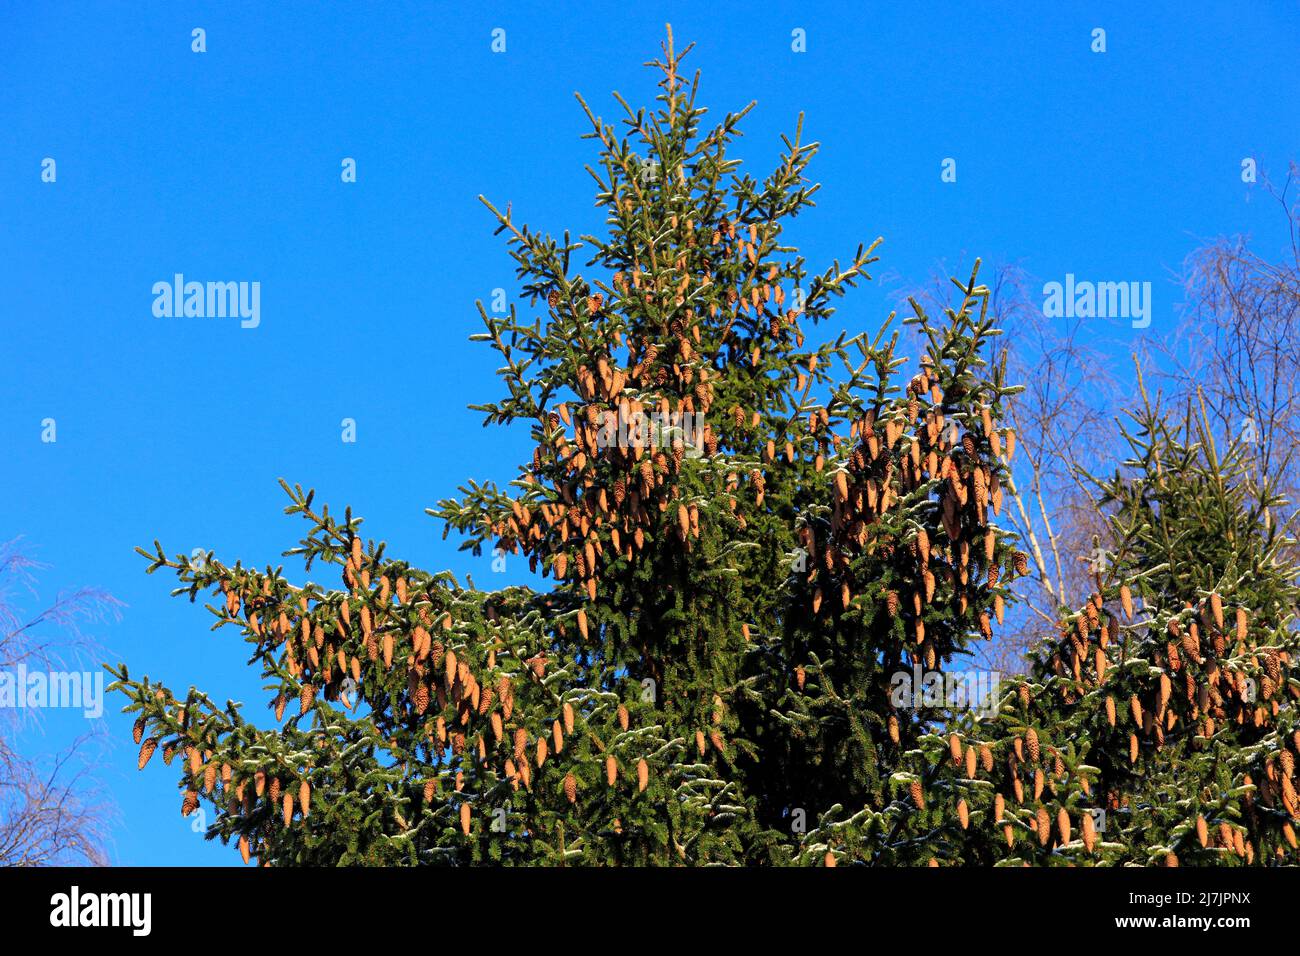 Norway spruce tree, Picea abies, growing in forest in Finland, tree top heavily laden with cones. Blue sky background. January 2022. Stock Photo